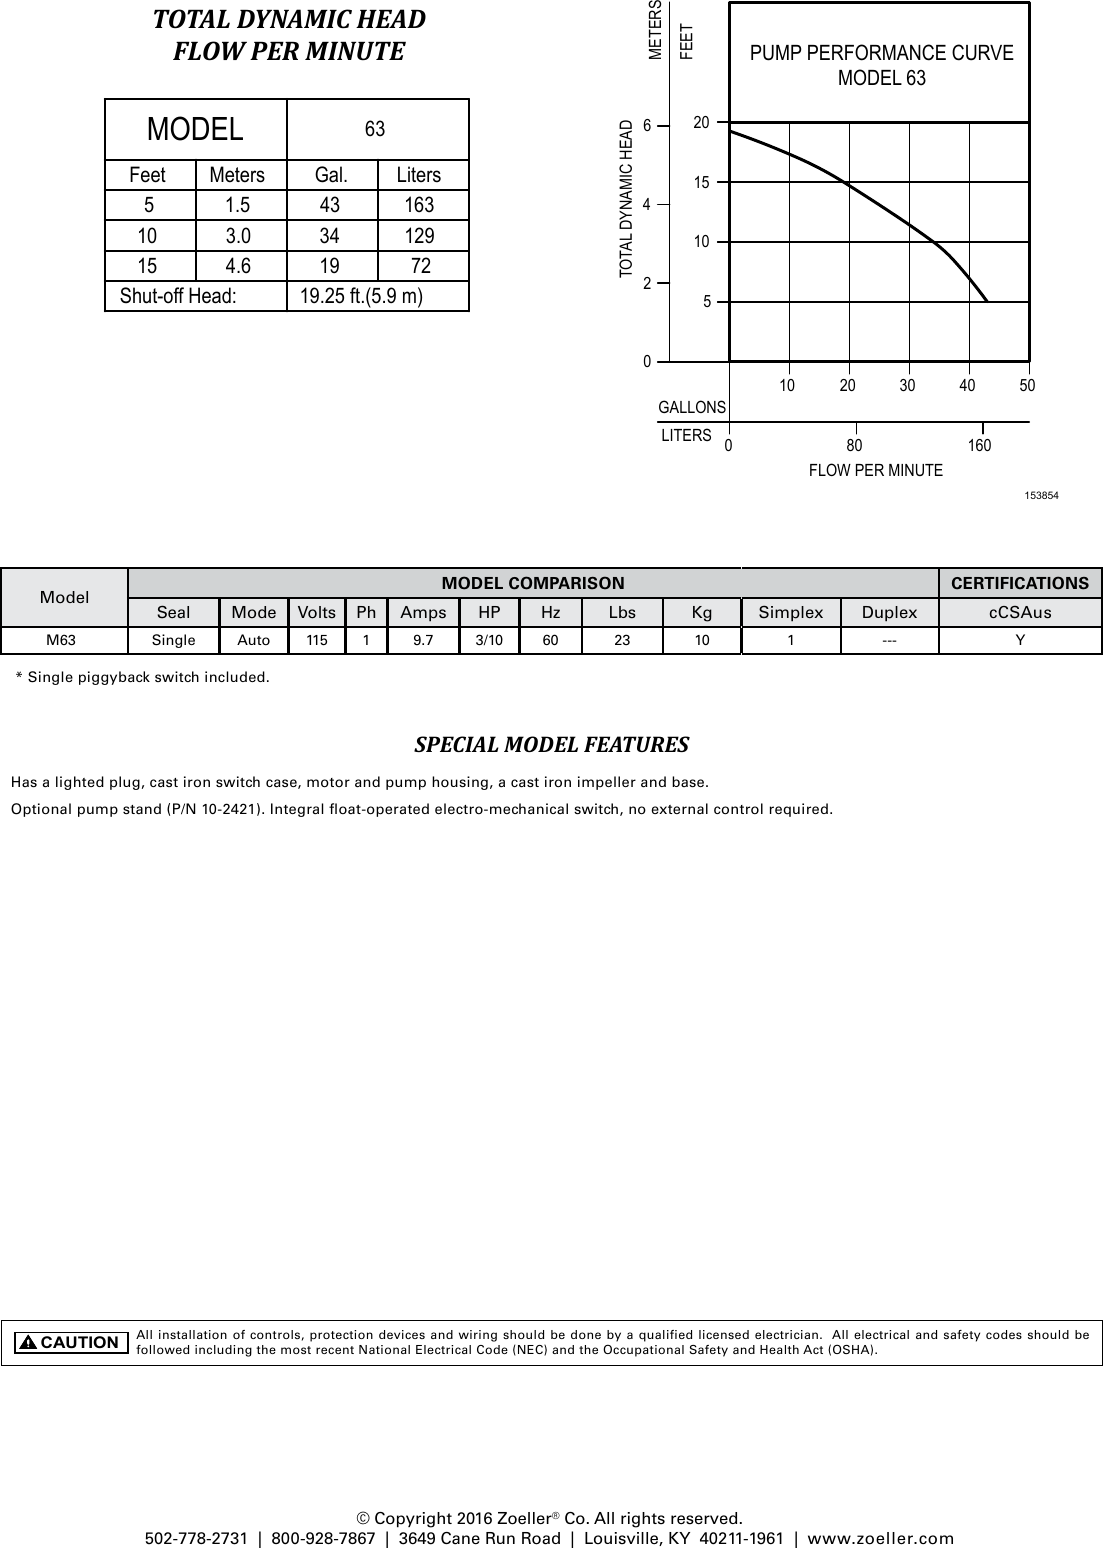 Page 2 of 2 - 551719 3 Zoeller M63 Technical Data Sheet